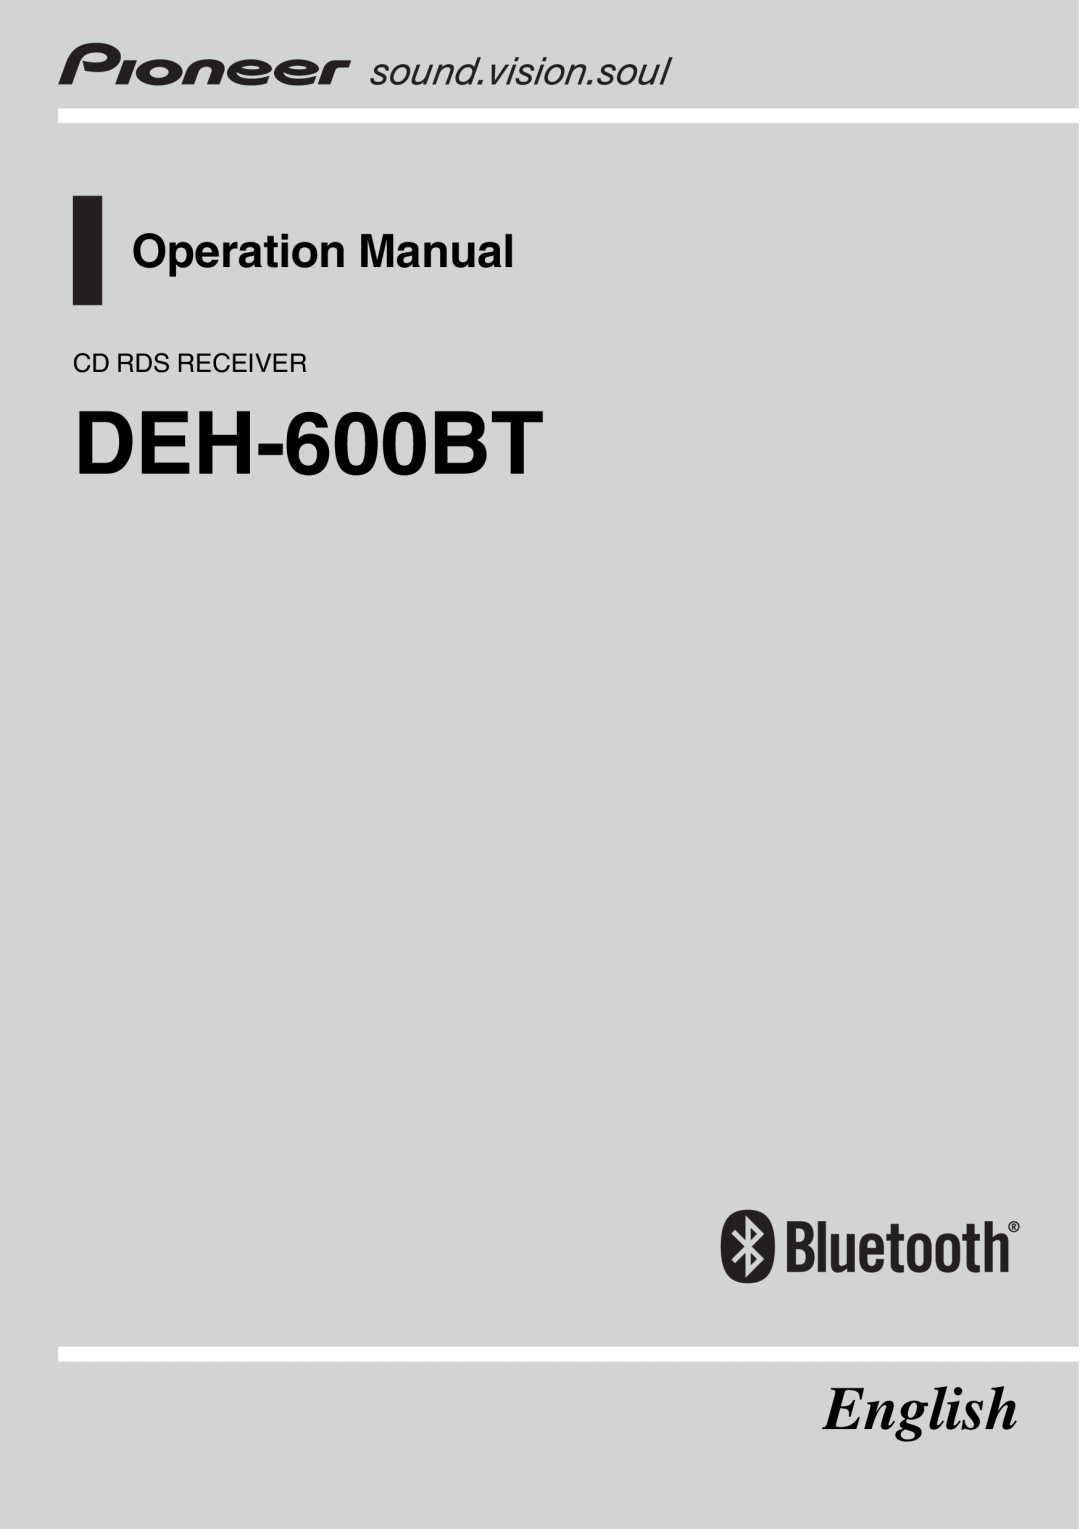 Pioneer DEH-600BT operation manual Cd Rds Receiver, English 